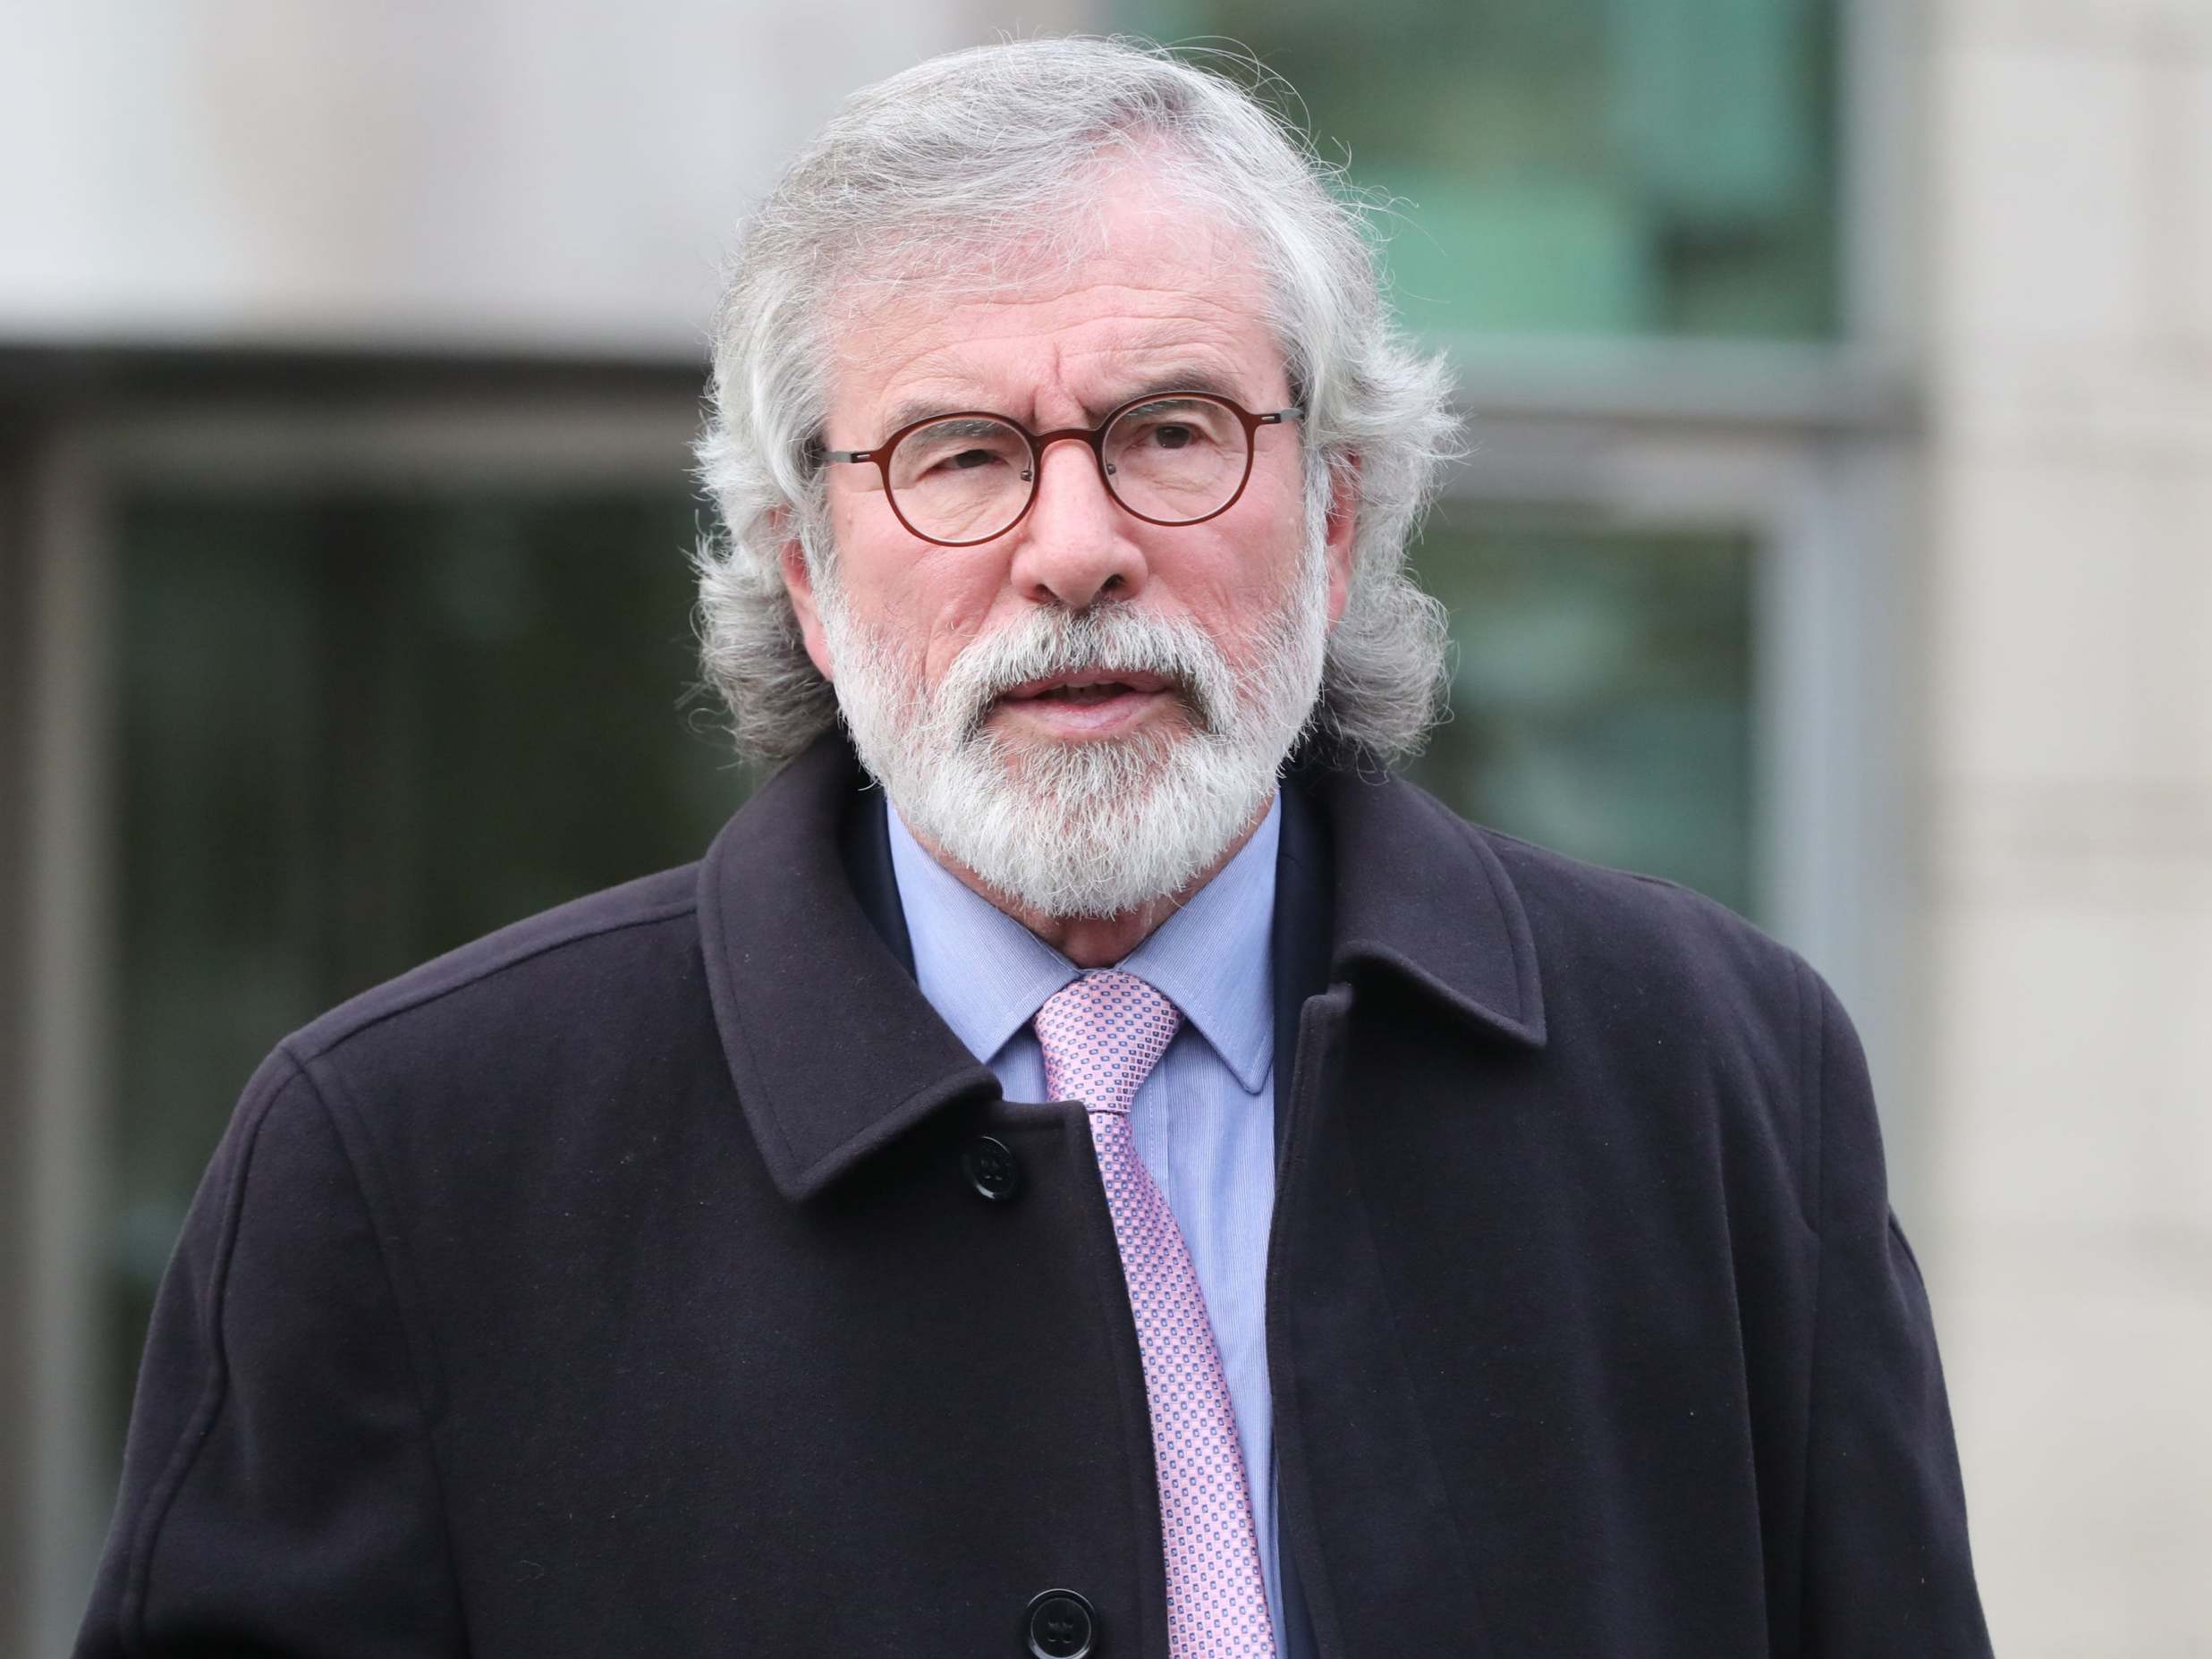 Former Sinn Fein President Gerry Adams has won a Supreme Court appeal against two historic convictions for attempting to escape from the Maze Prison in the 1970s